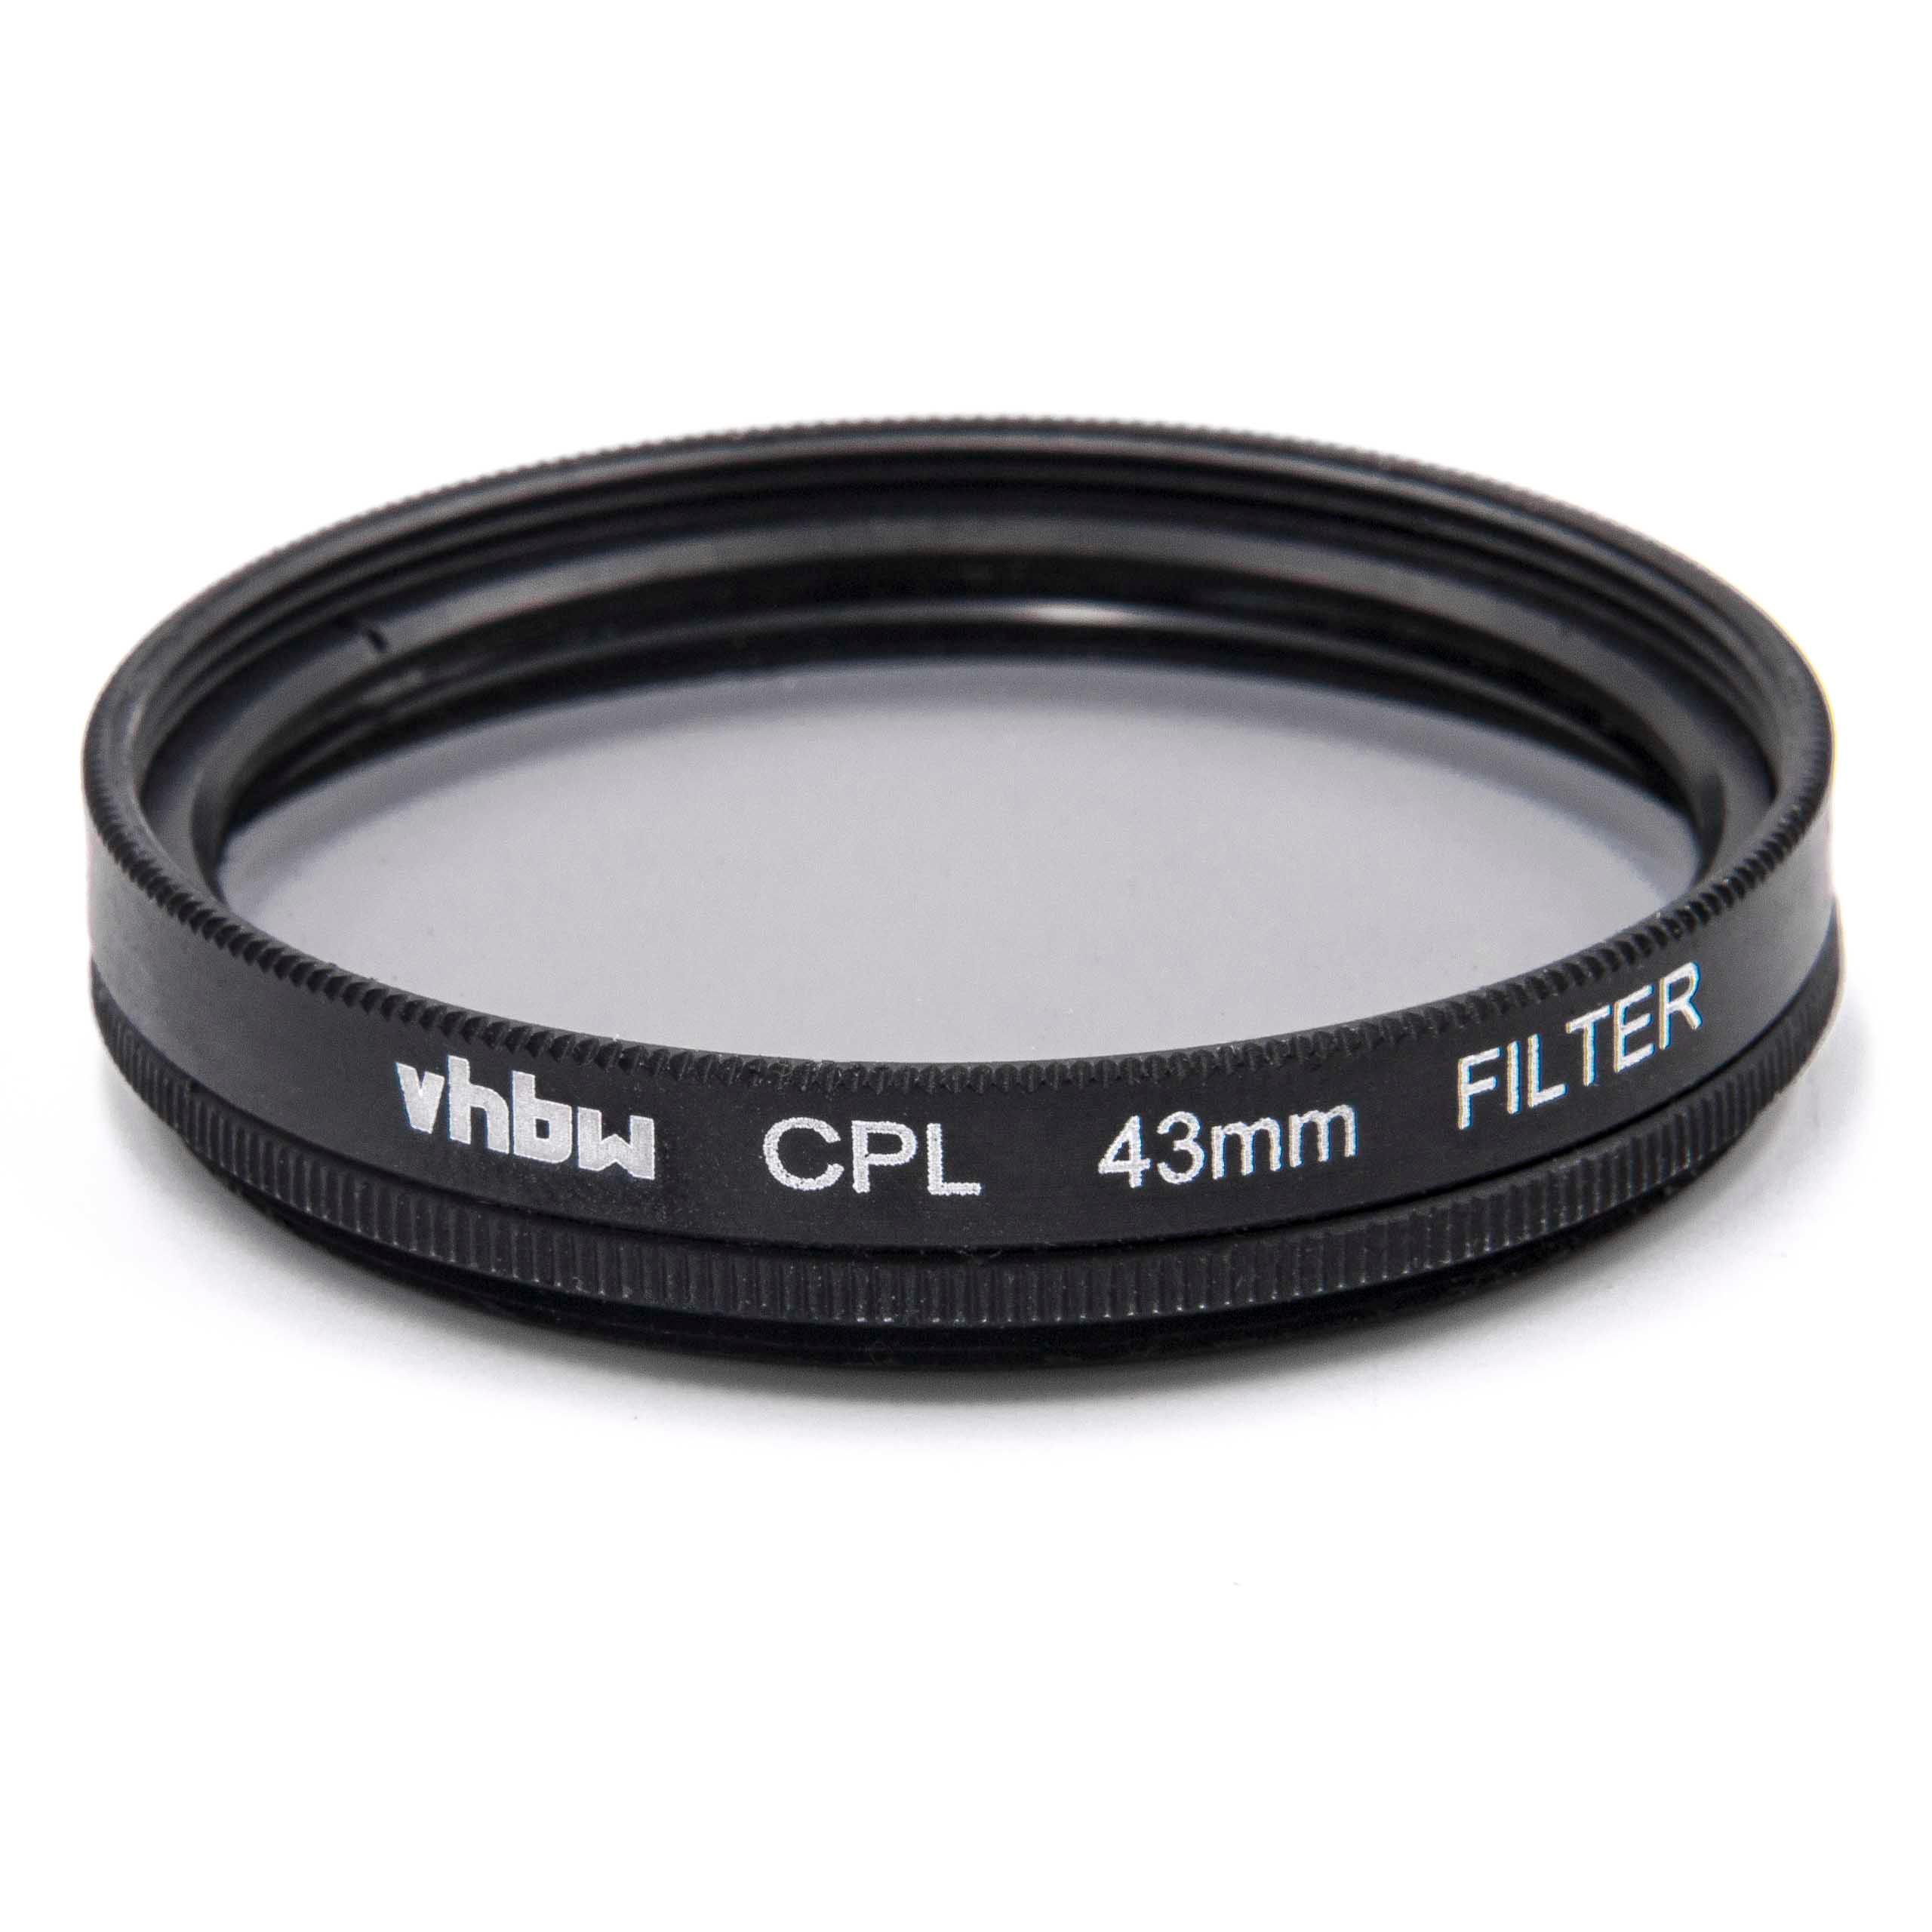 Polarising Filter suitable for Cameras & Lenses with 43 mm Filter Thread - CPL Filter